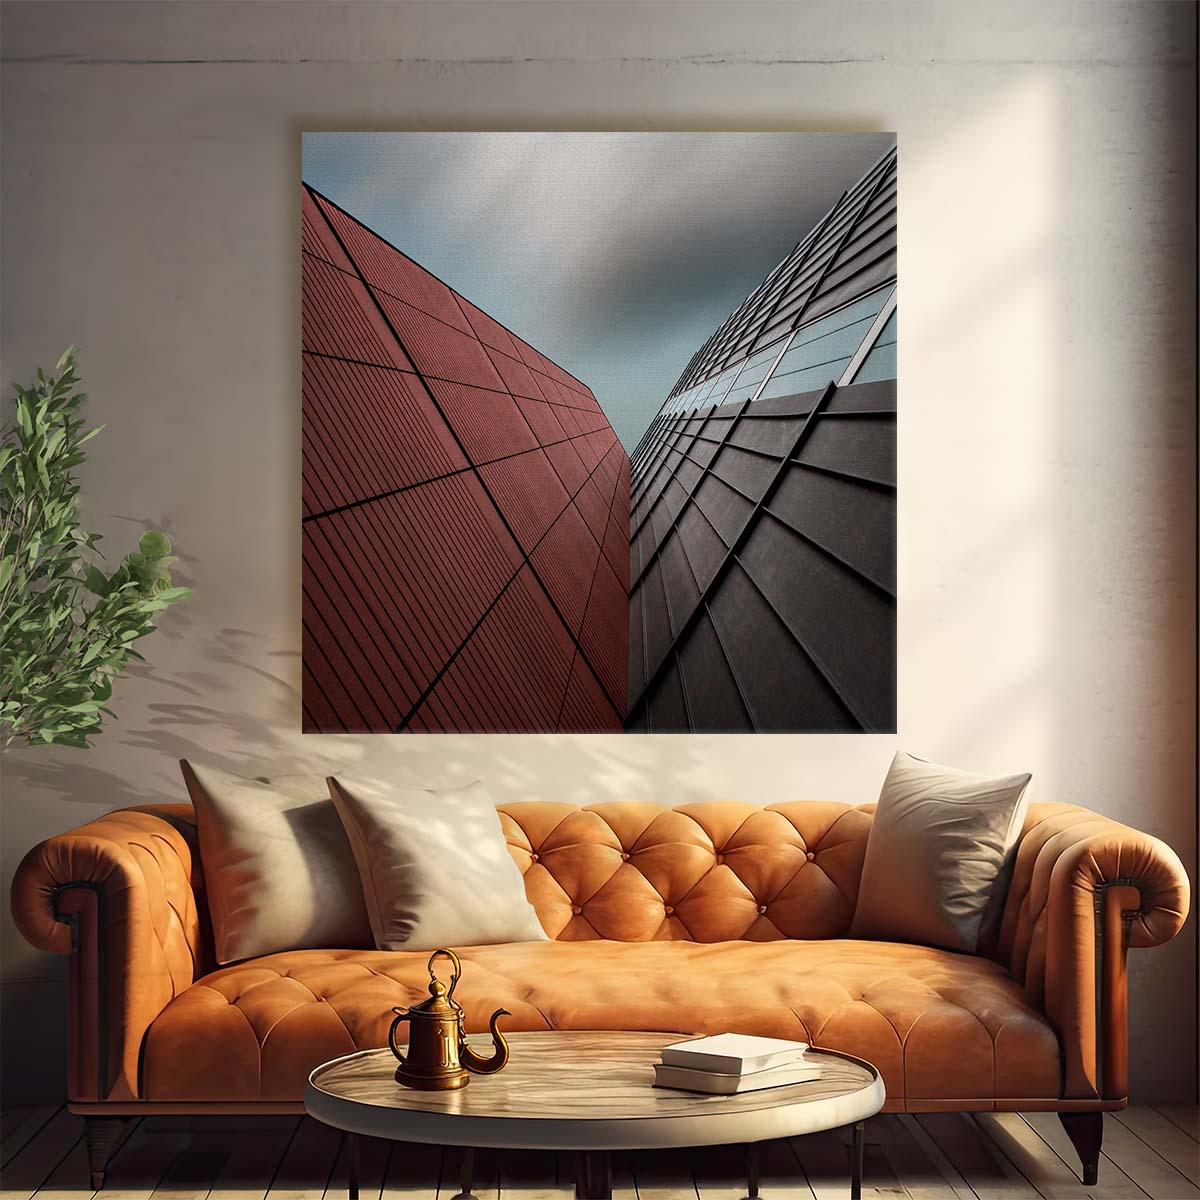 Abstract Urban Architecture High Facade Grid Photography Wall Art by Luxuriance Designs. Made in USA.